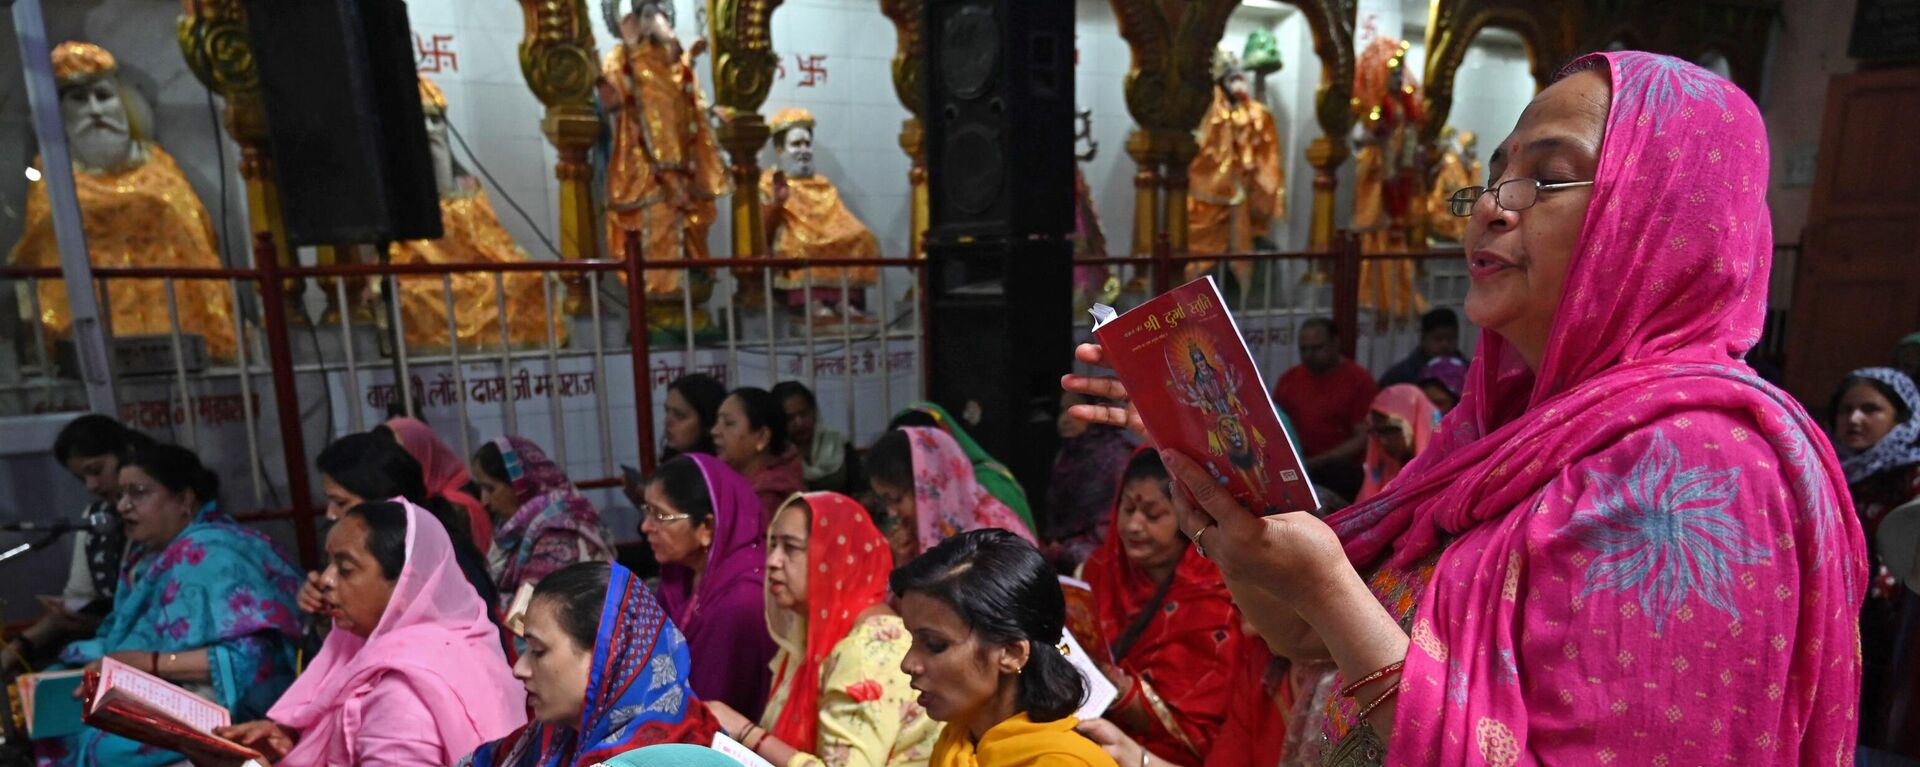 Hindu devotees offer prayers on the first day of Navratri celebrations at Mata Longa Wali Devi temple in Amritsar on March 22, 2023. - Sputnik India, 1920, 22.03.2023